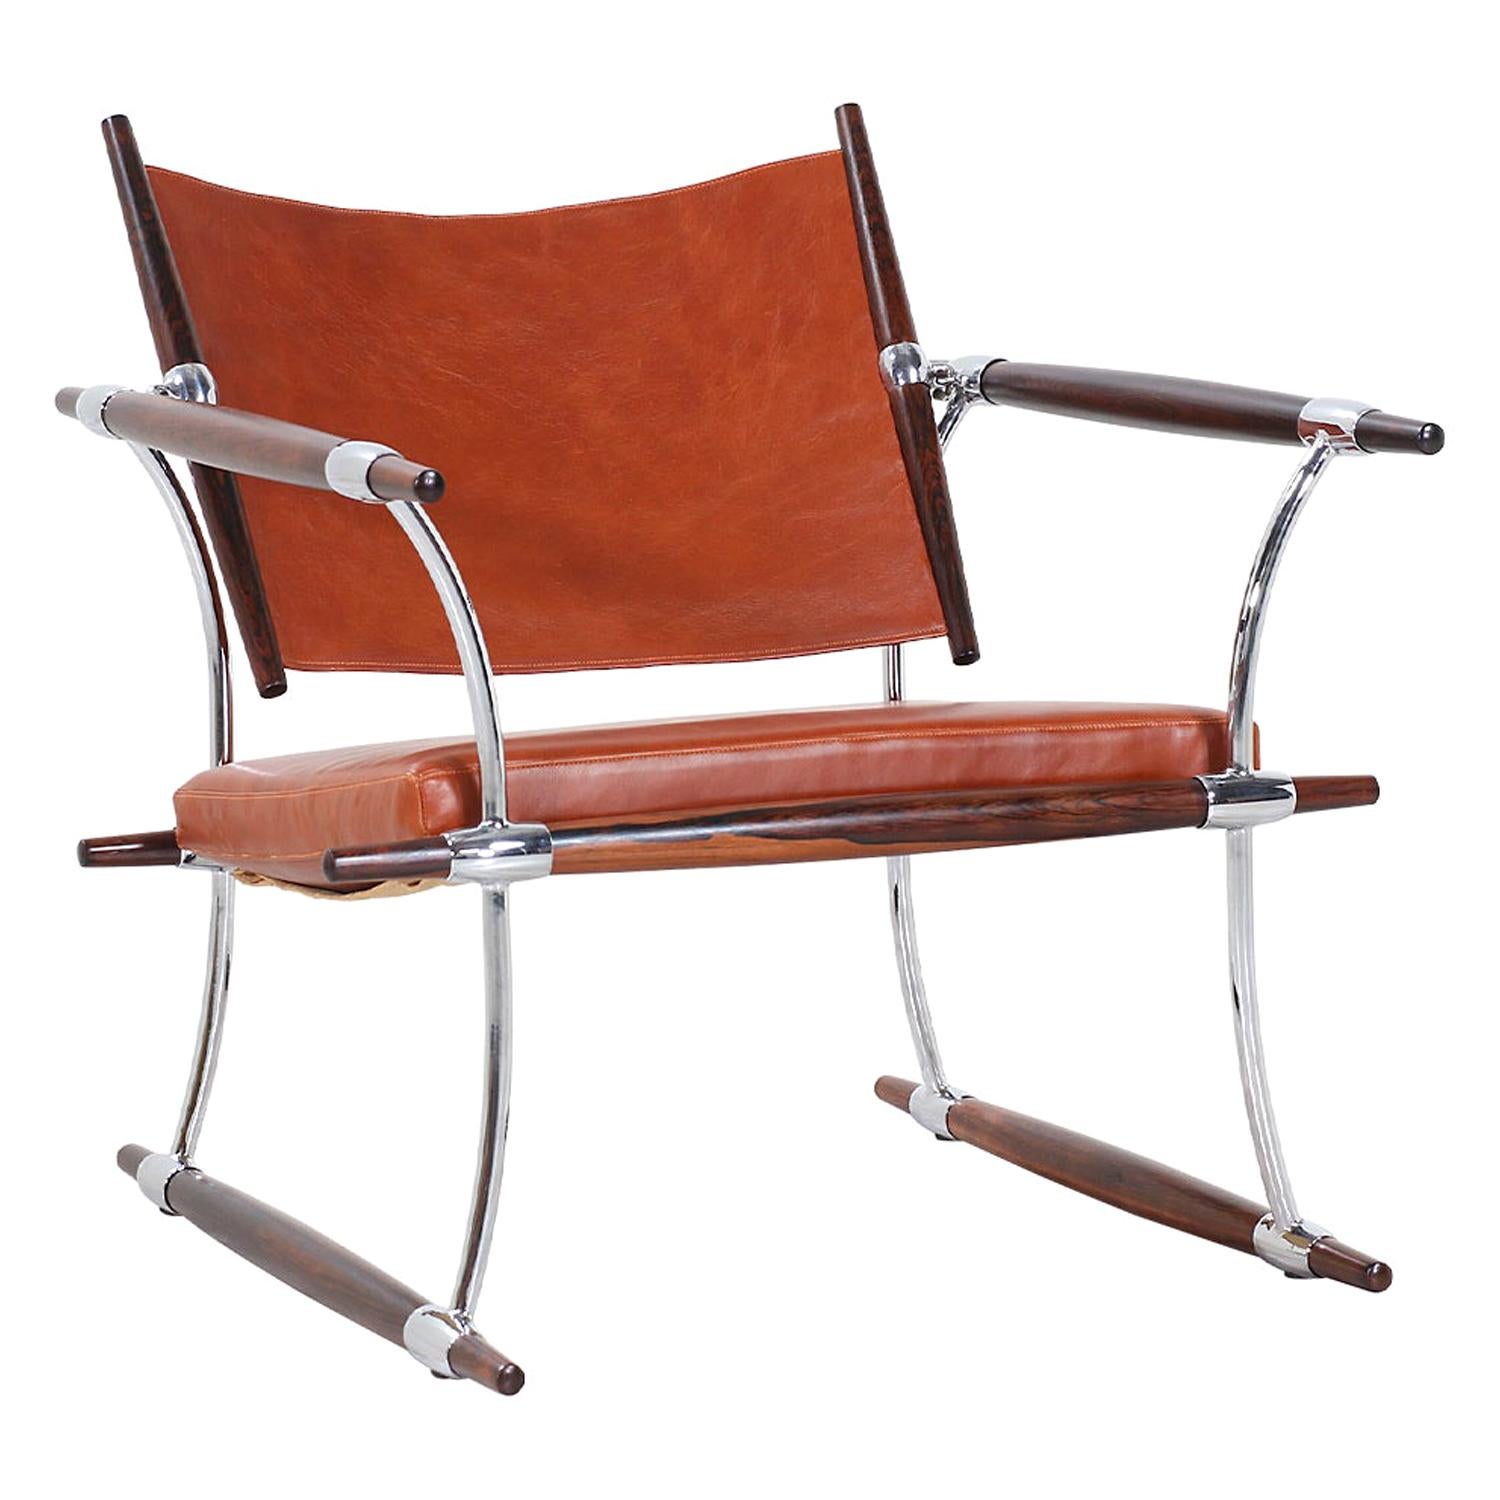 Jens H. Quistgaard "Stokke" Rosewood Lounge Chair for Nissen